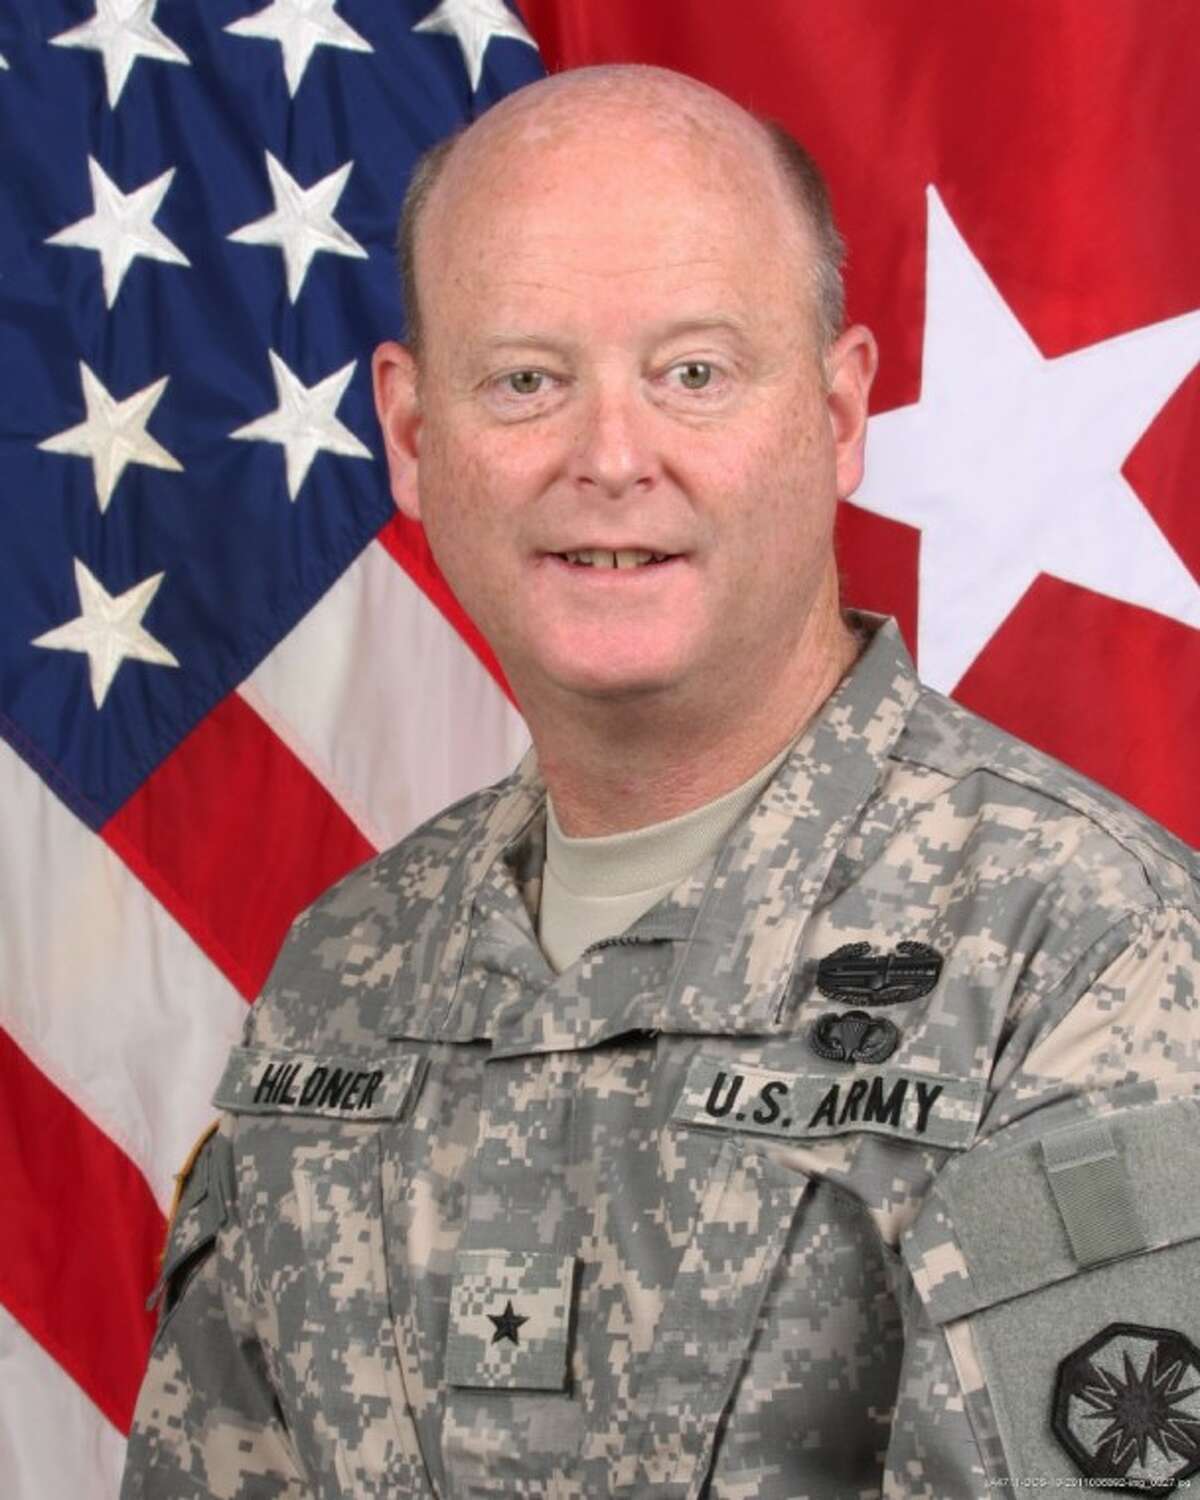 This undated photo provided by the U.S. Army shows Brig. Gen. Terence Hildner. The U.S. Army says Hildner, 49, died Friday, Feb. 3, in Kabul, Afghanistan, of apparent natural causes. Hildner has commanded the 13th Expeditionary Sustainment Command at Fort Hood since August 2010.